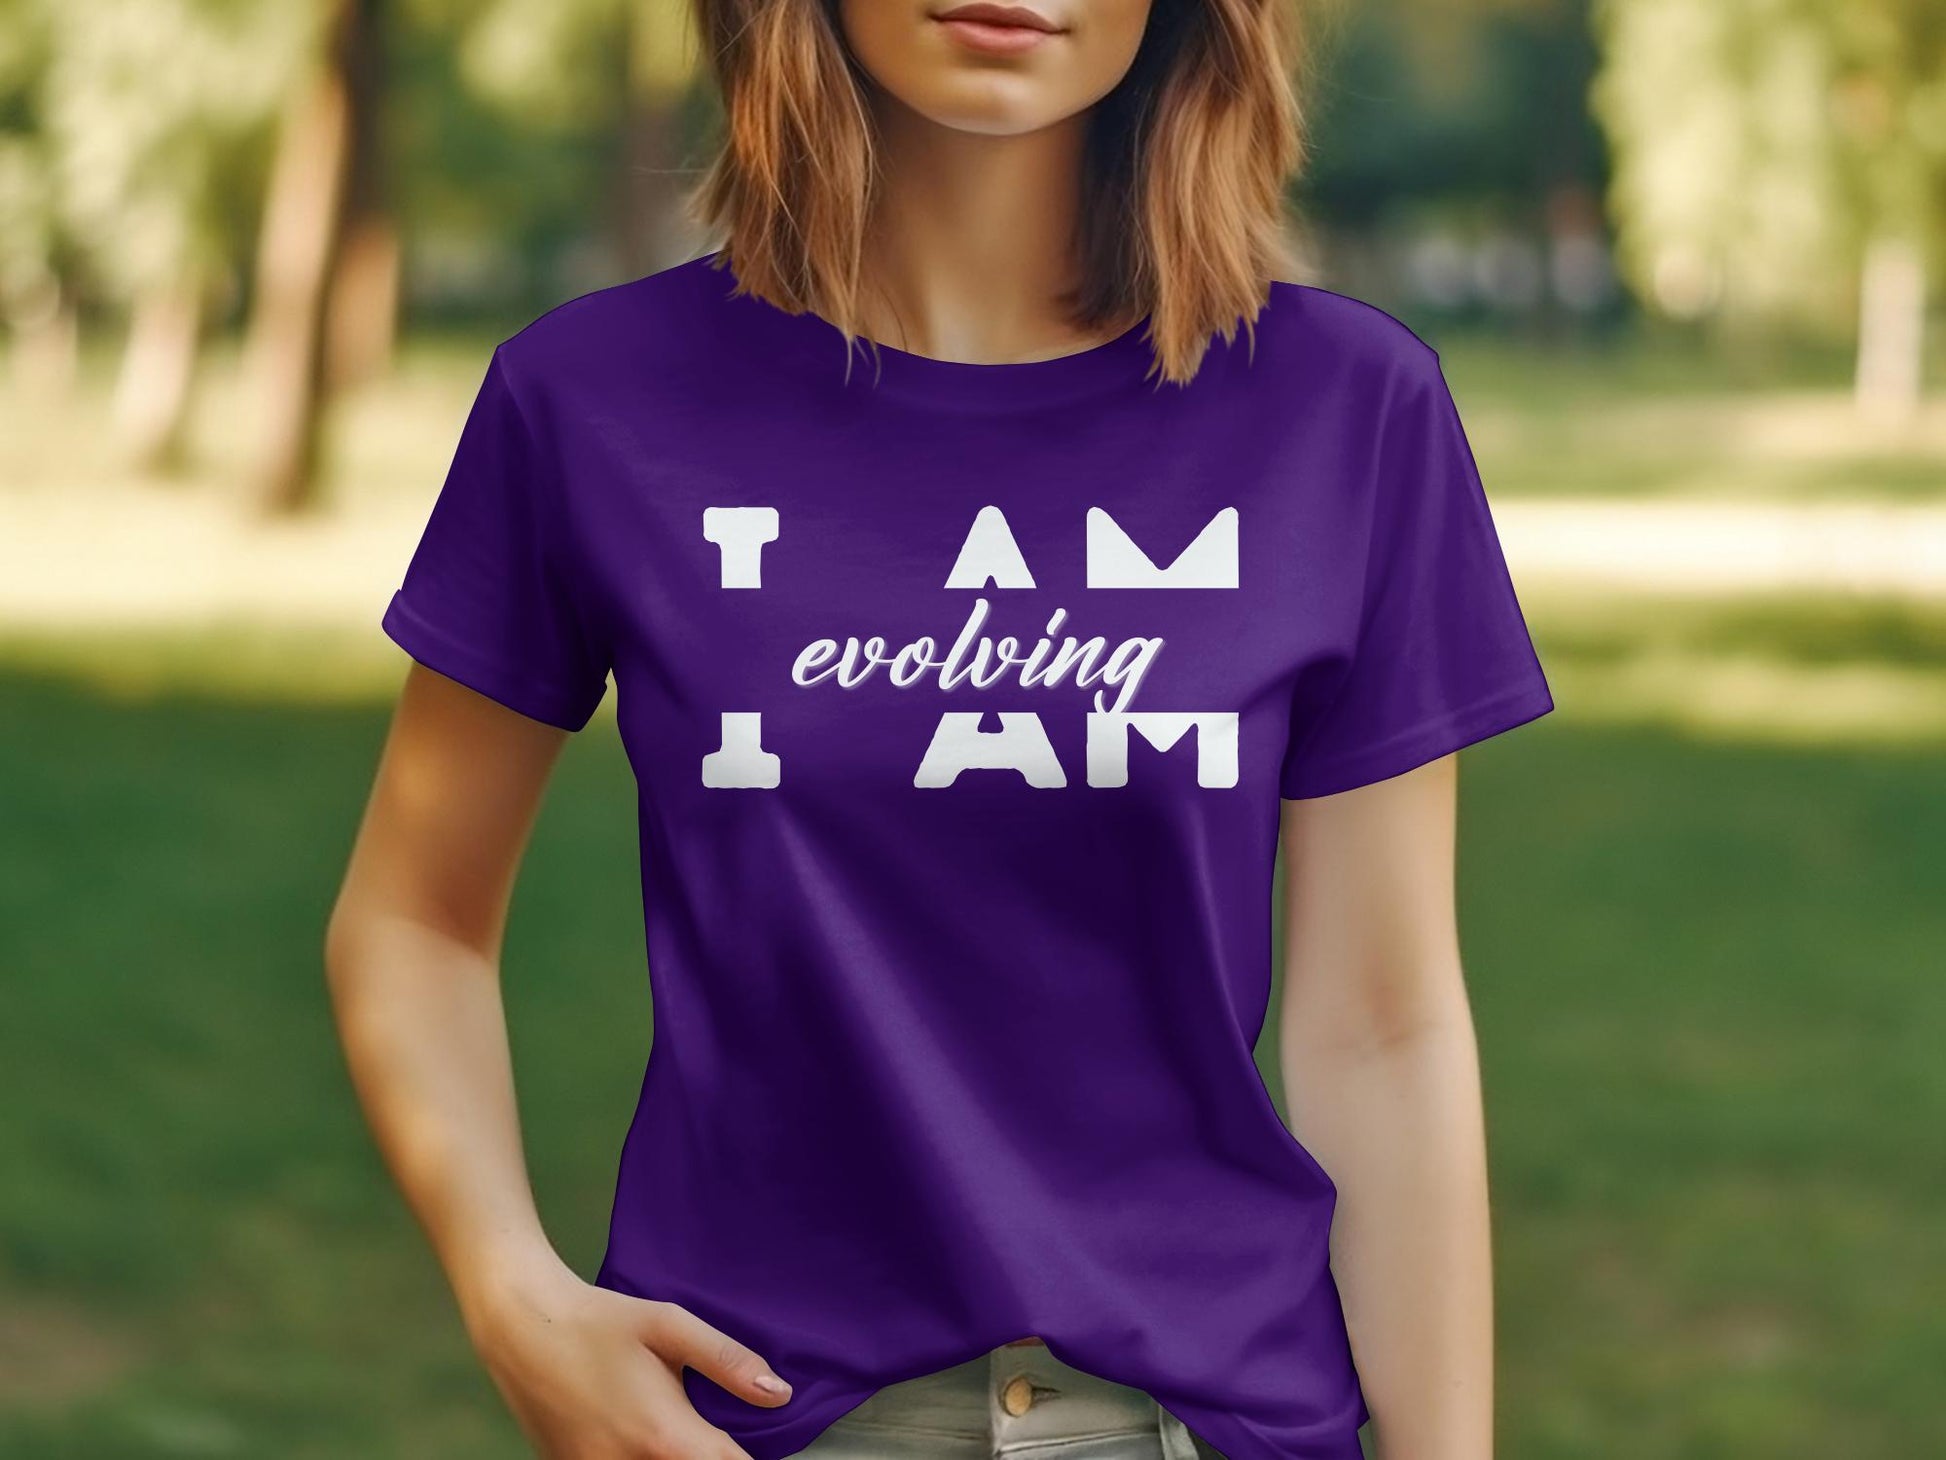 I Am Evolving - An encouraging and motivating Affirmation Quote T-shirt